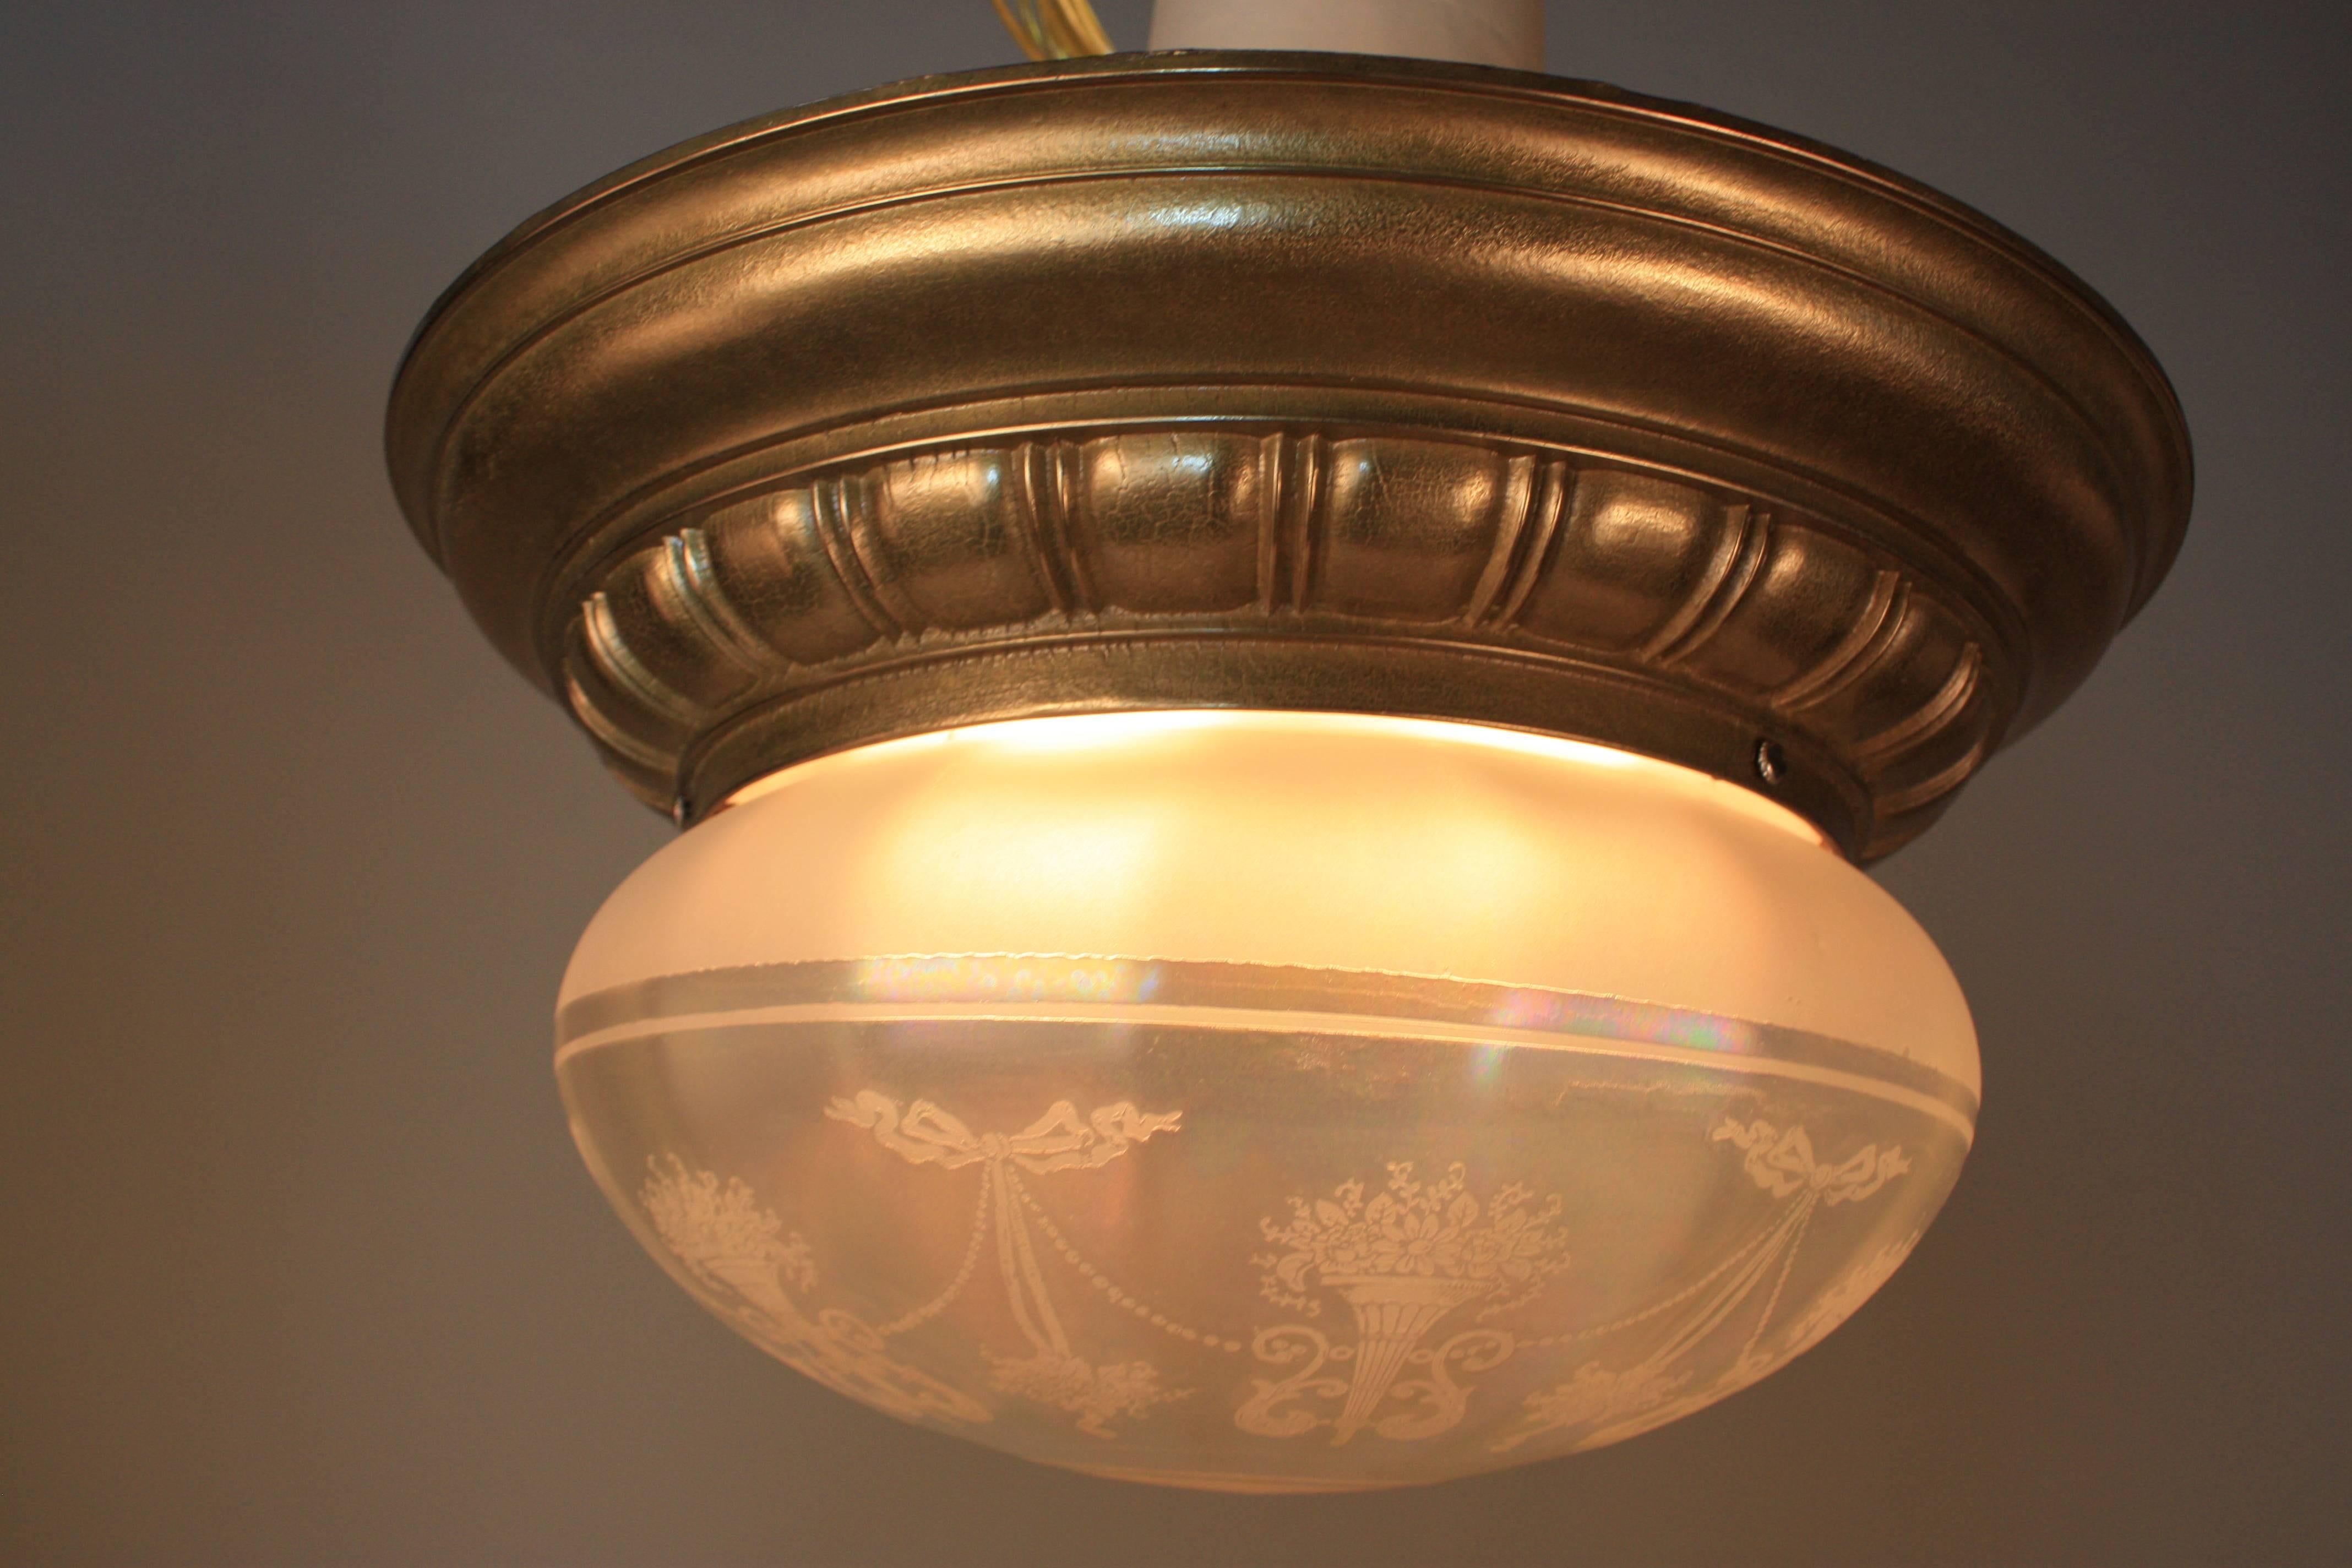 A fabulous cased brass flush mount American chandelier with acid etched glass shade.
Total four lights 60 watts each.